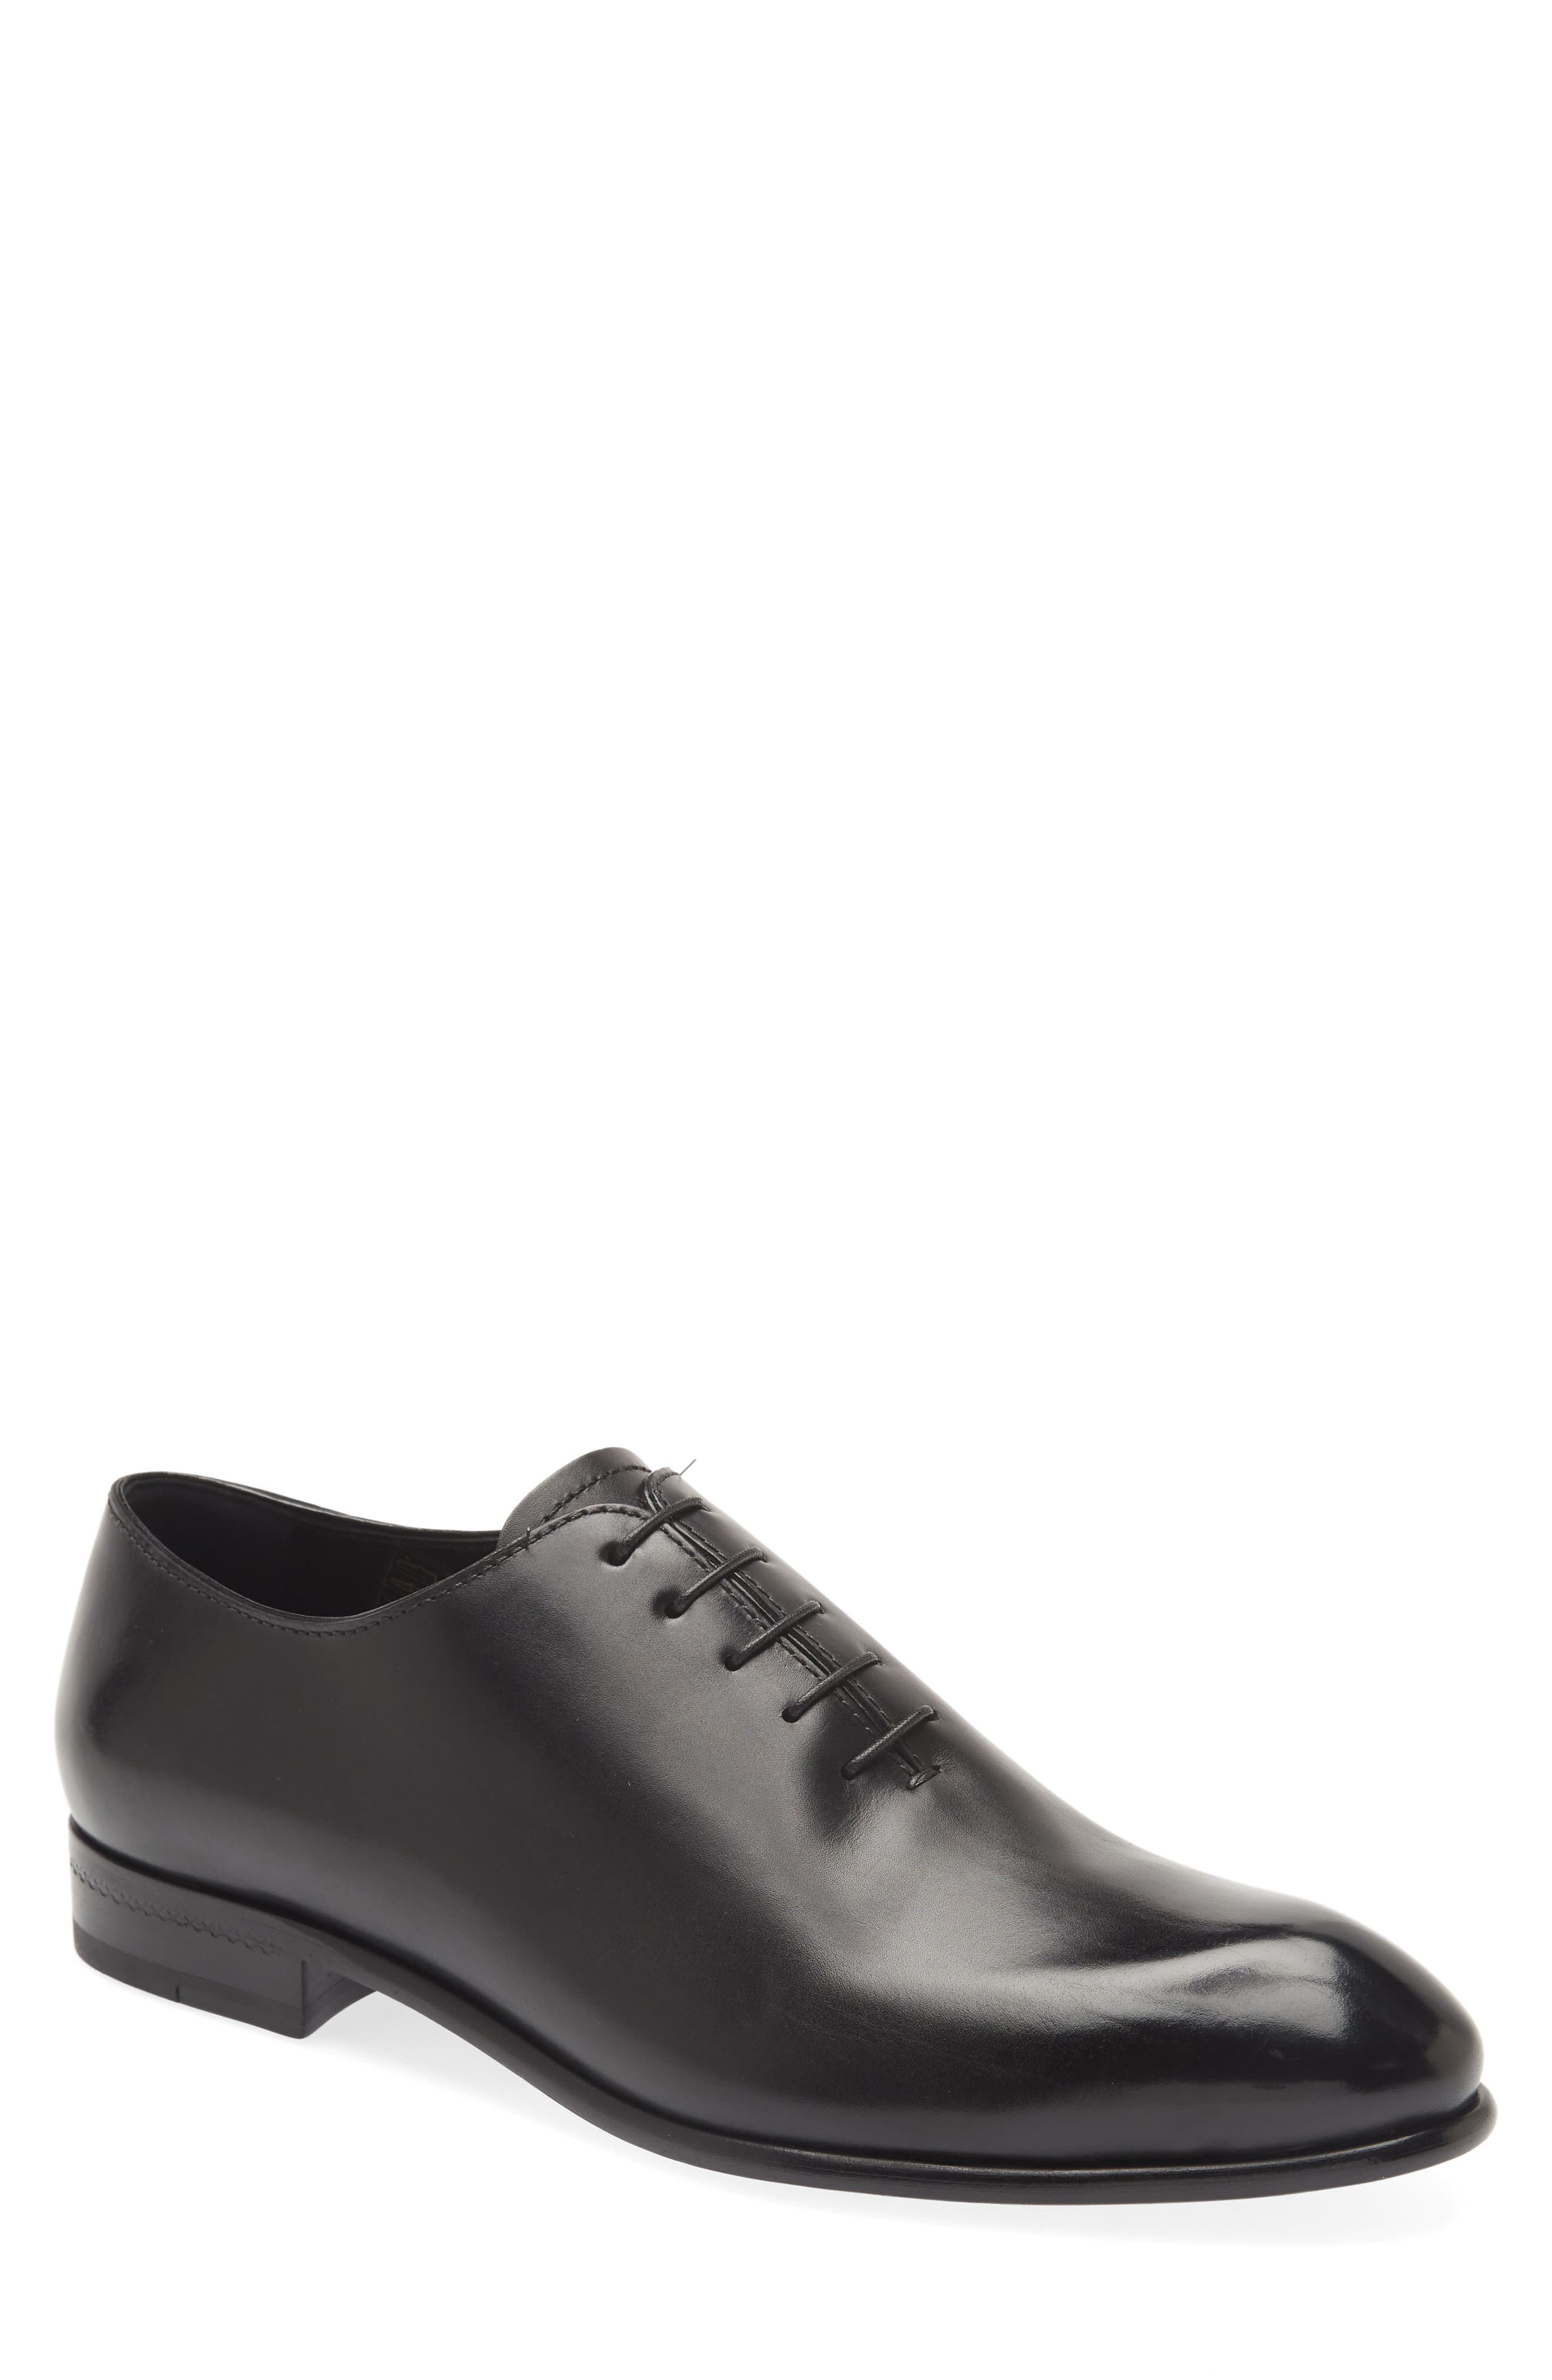 Vienna leather Oxford shoes